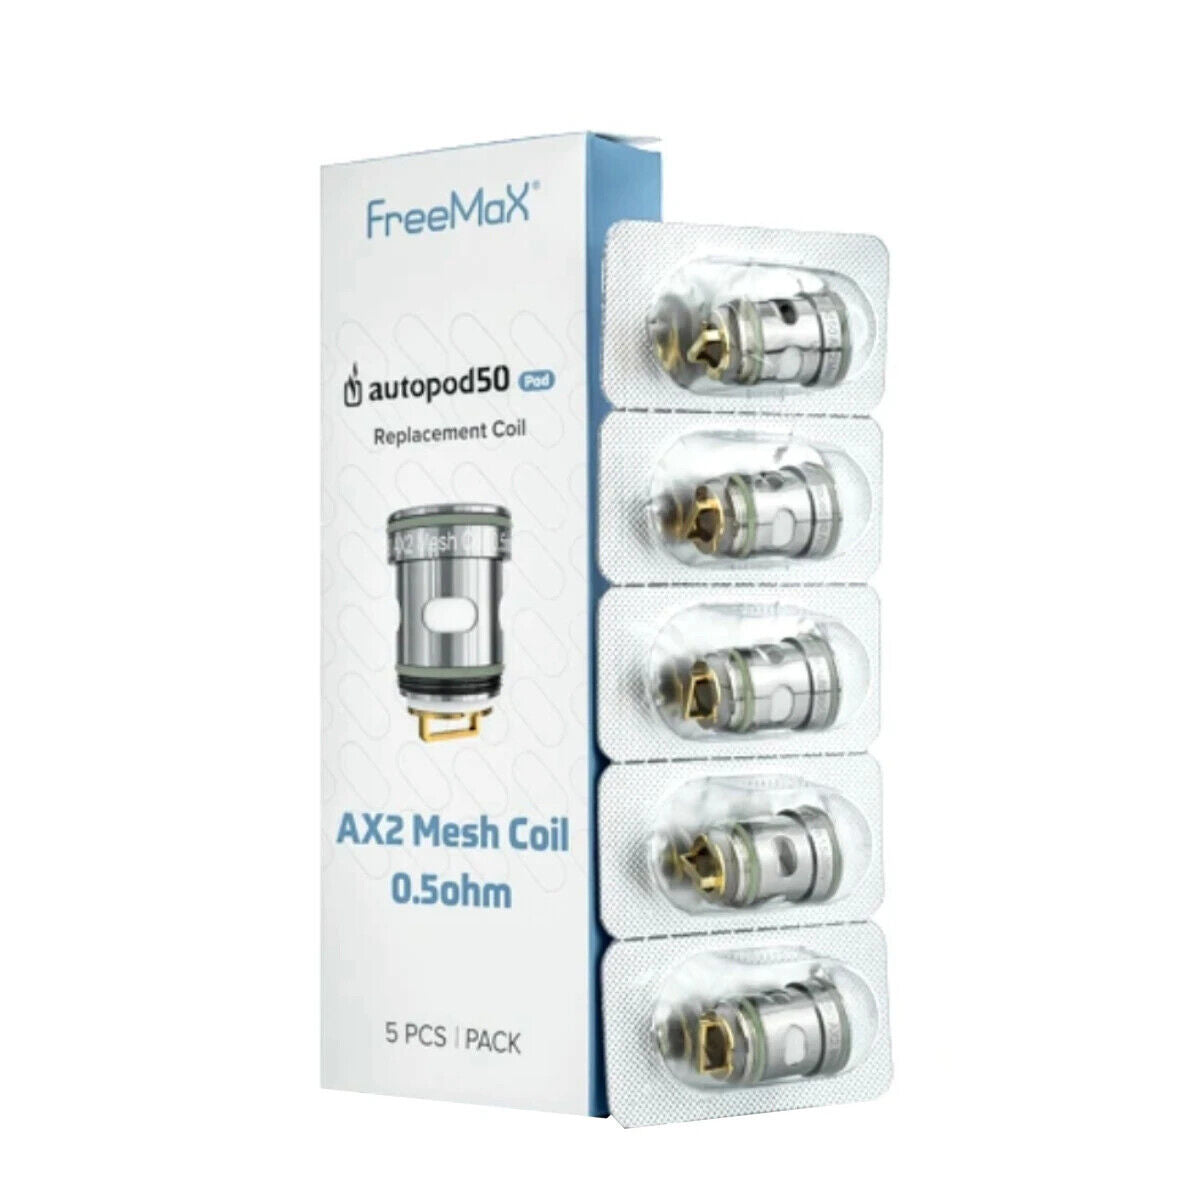 High-Quality Premium Freemax AutoPod50 Replacement Coils - 5 Pack